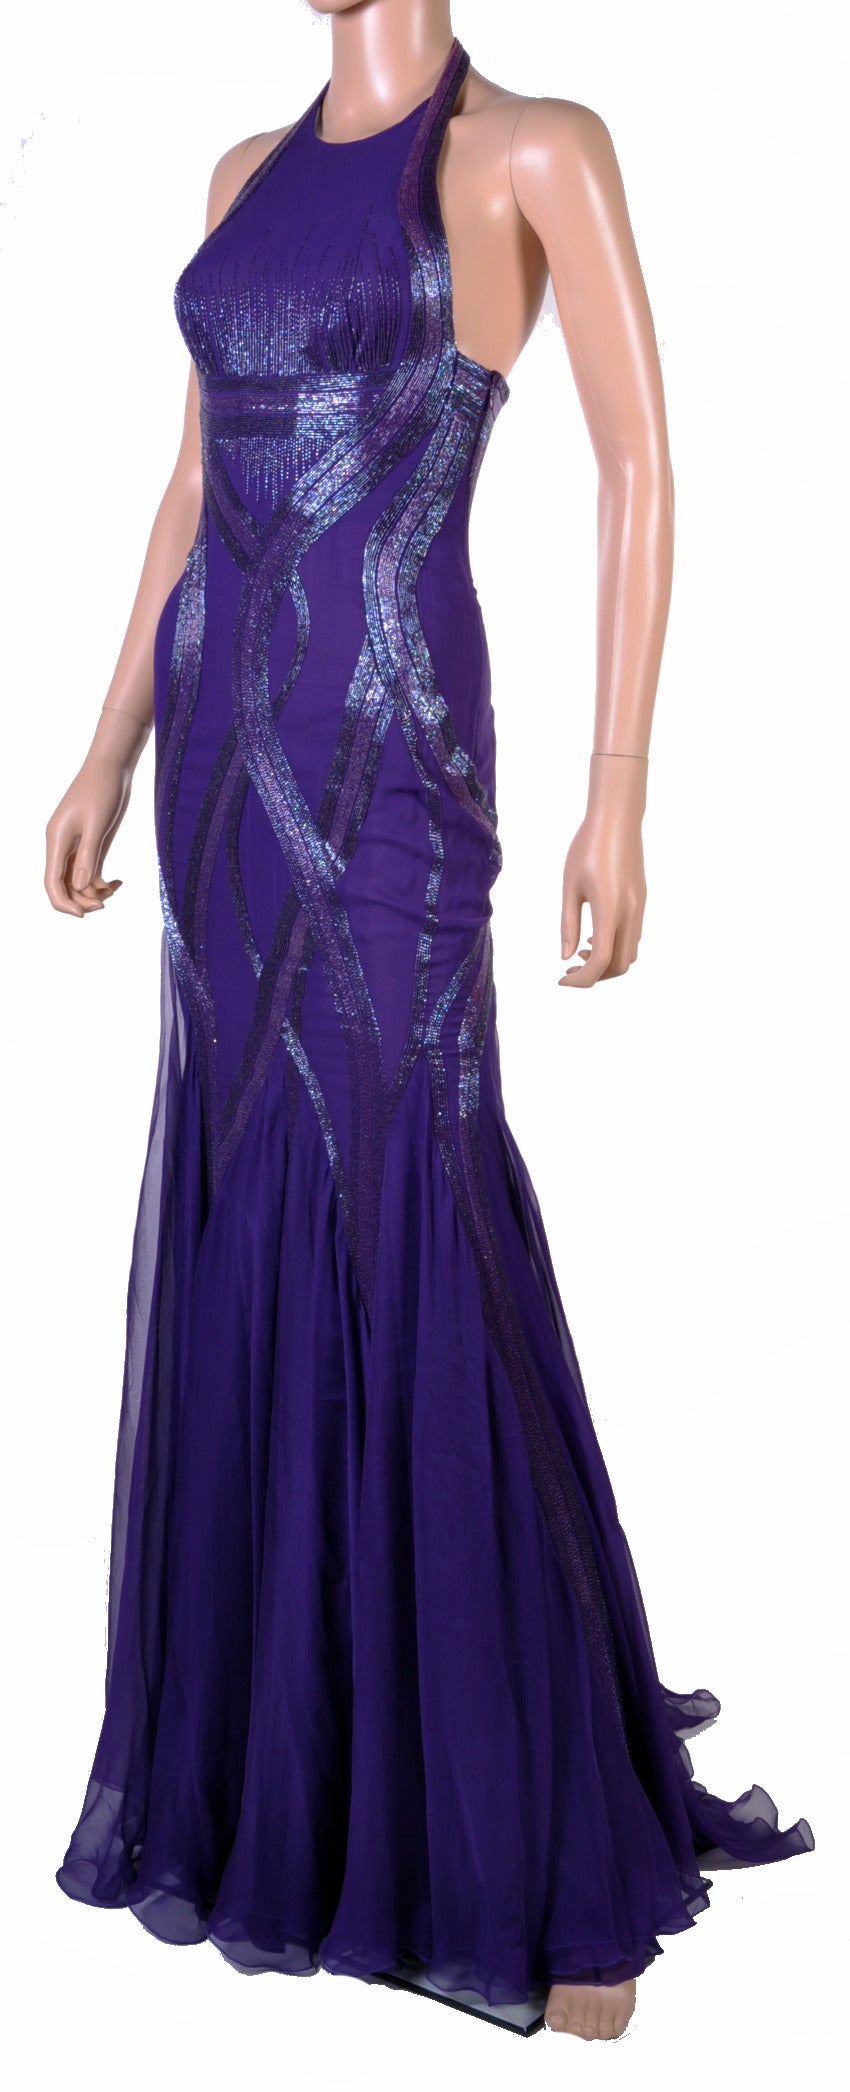 BRAND NEW VERSACE DRESS

Rich purple color, mermaid design and artfully embellished body 

with open back - ensure 

a stunning silhouette. 

Size 38

Made in Italy

New, with tags

Retail price is $12,735.00